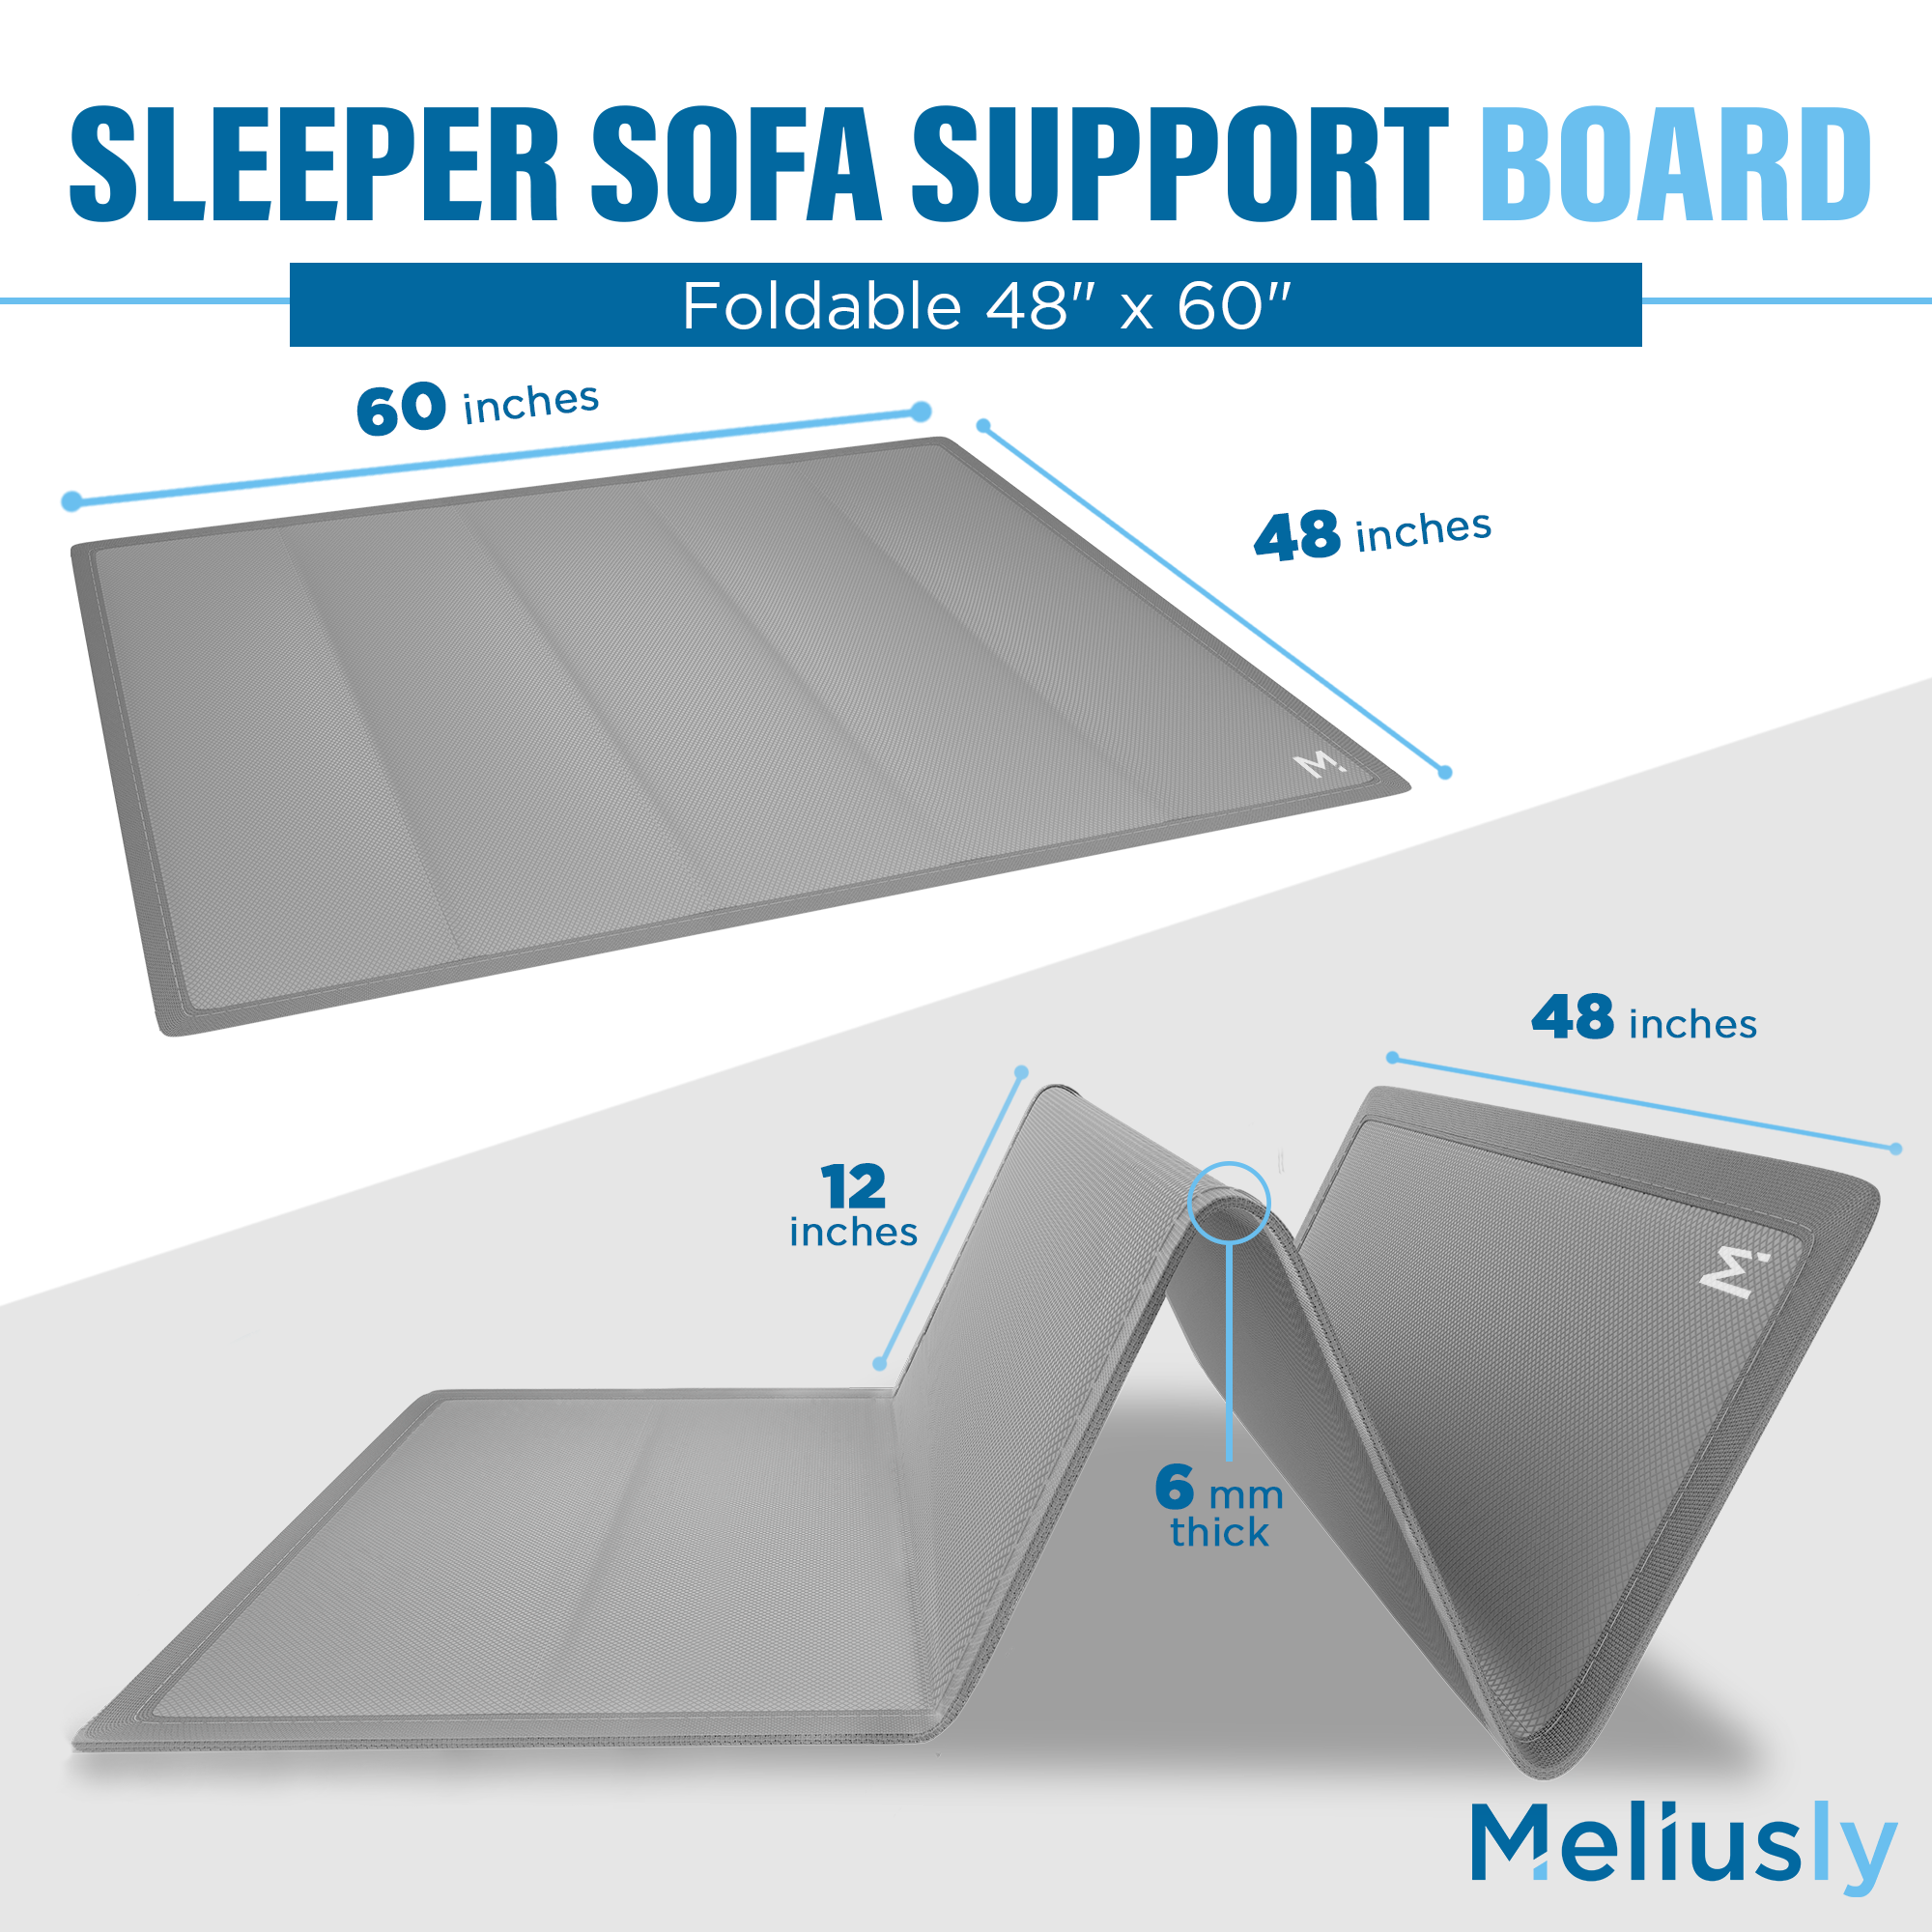 Meliusly® Sofa Cushion Support Board (17x79) - Couch Supports for